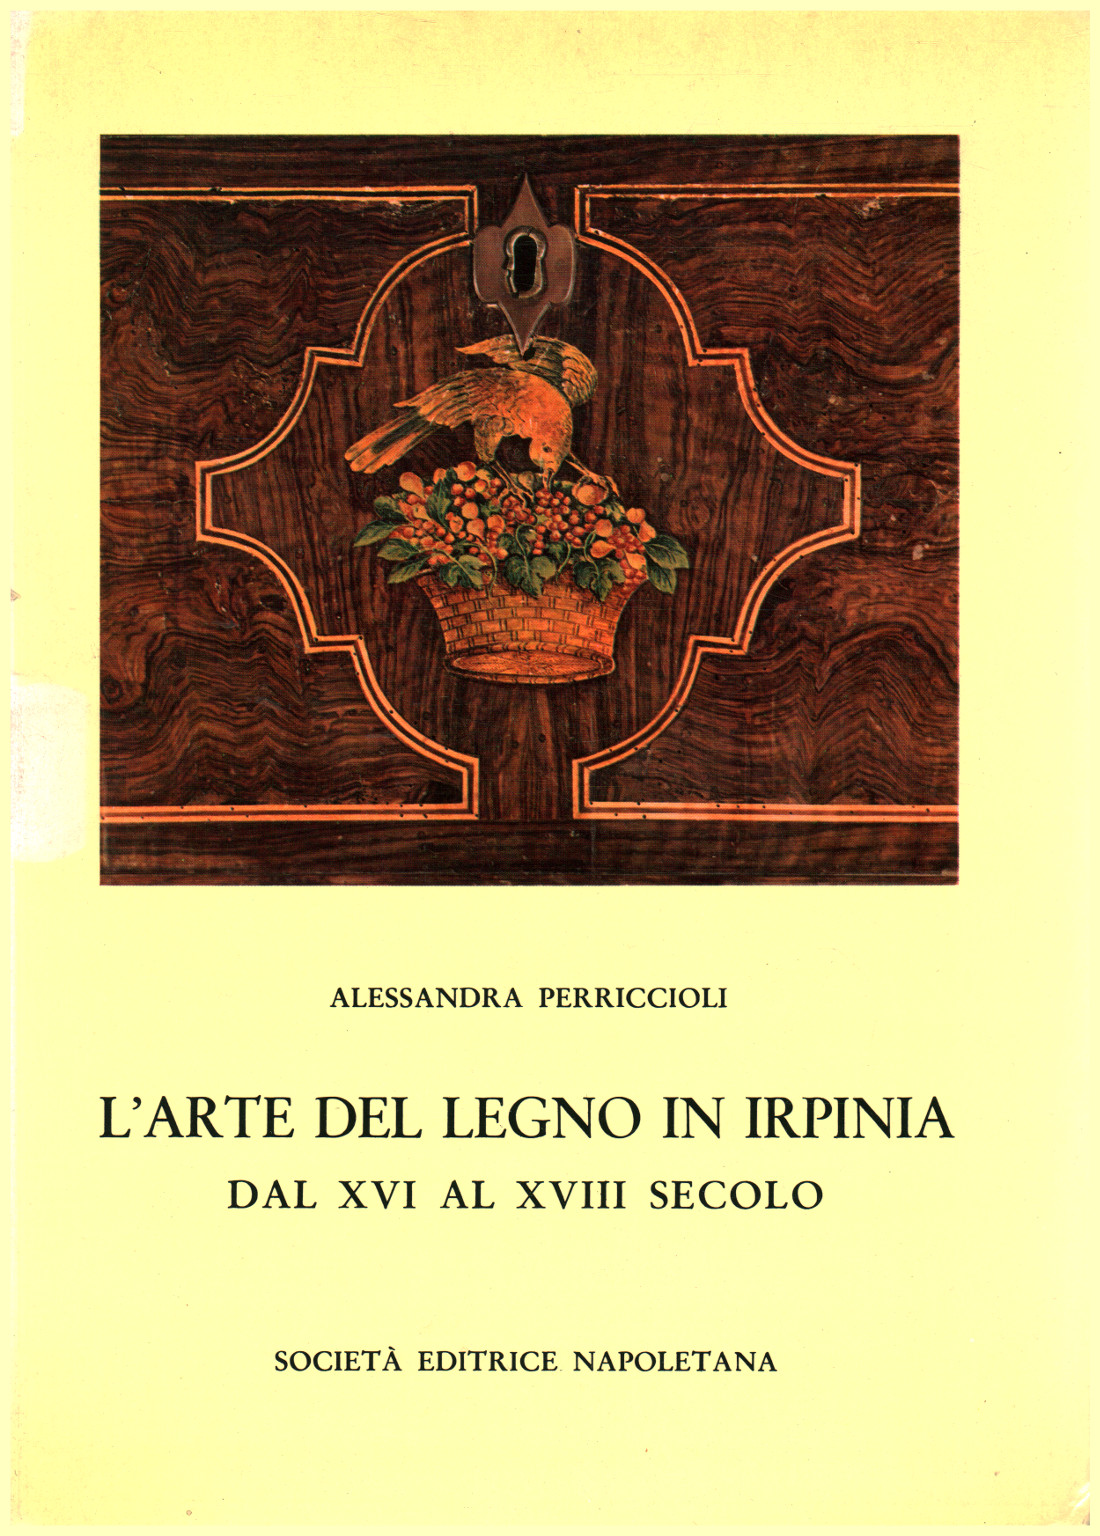 The art of wood in Irpina from the 16th to the 18th century, Alessandra Perriccioli